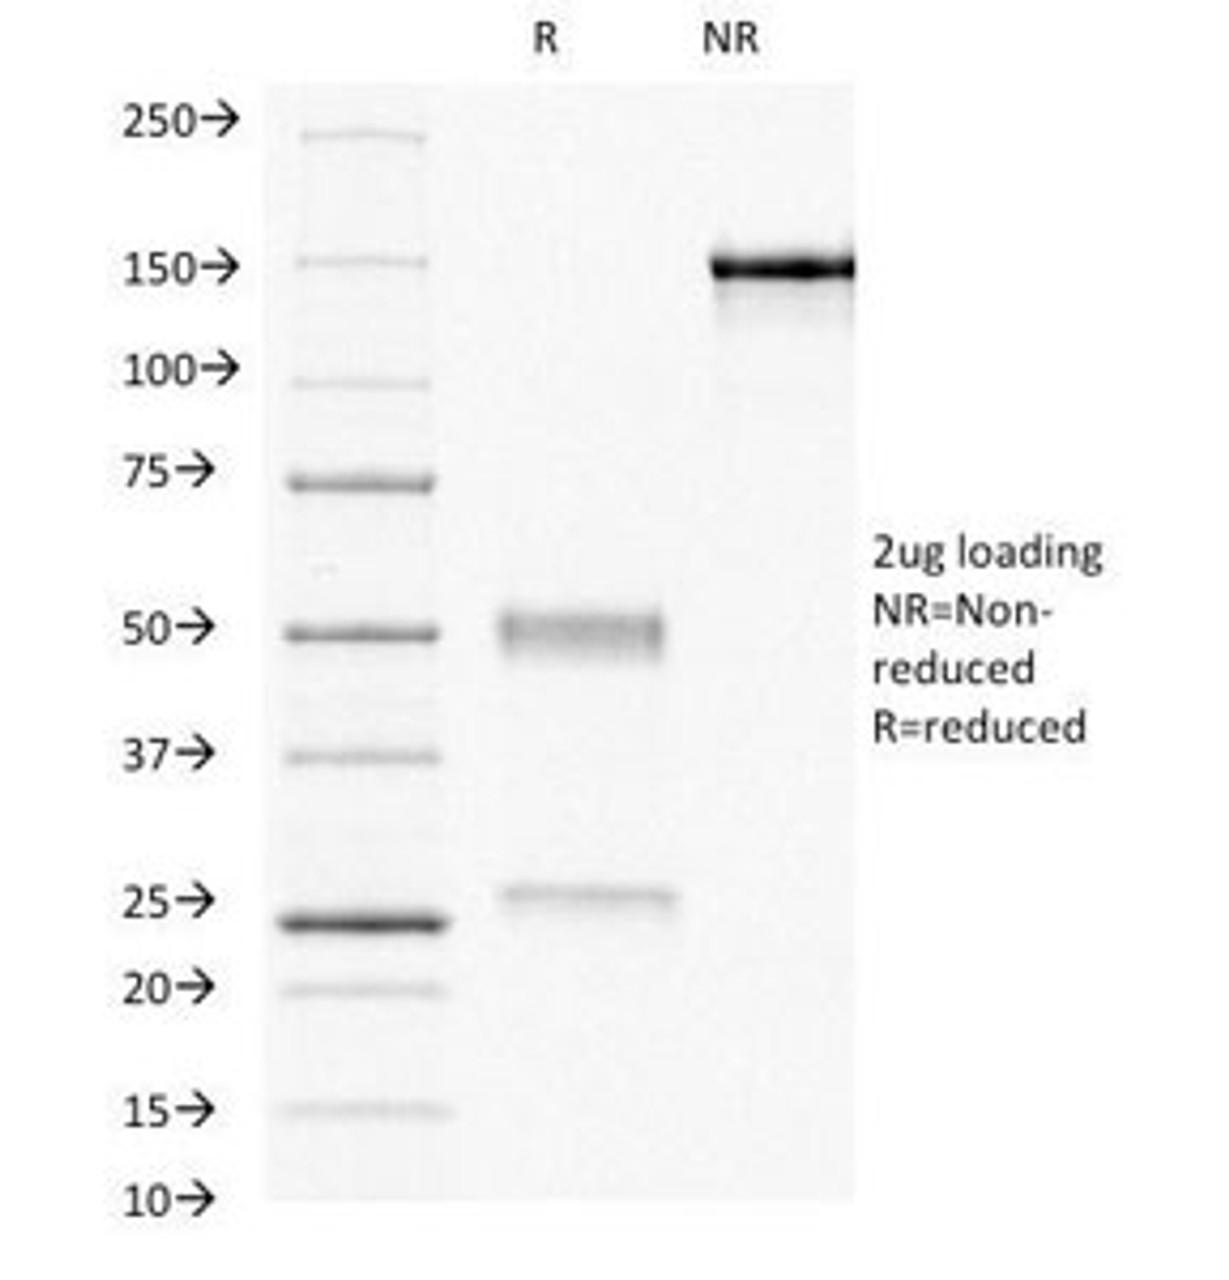 SDS-PAGE Analysis of Purified, BSA-Free Progesterone Receptor Antibody (clone PR484) . Confirmation of Integrity and Purity of the Antibody.